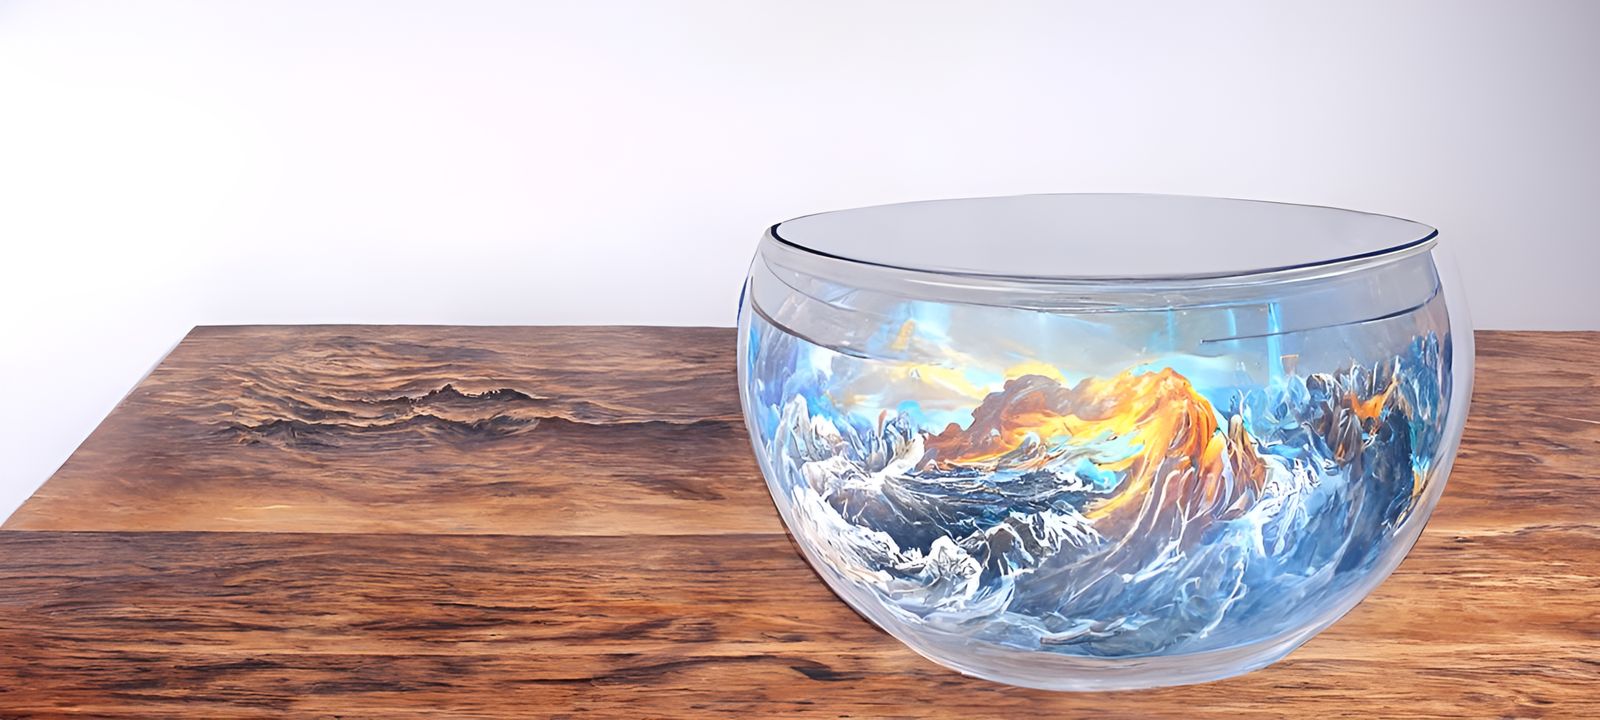 A Beautiful Painting of a Terrifying and Expansive Ocean Maelstrom and  Tsunami In a fishing bowl with goldfish, a fish bowl is on a wooden level  by Caspar David Friedrich - AI